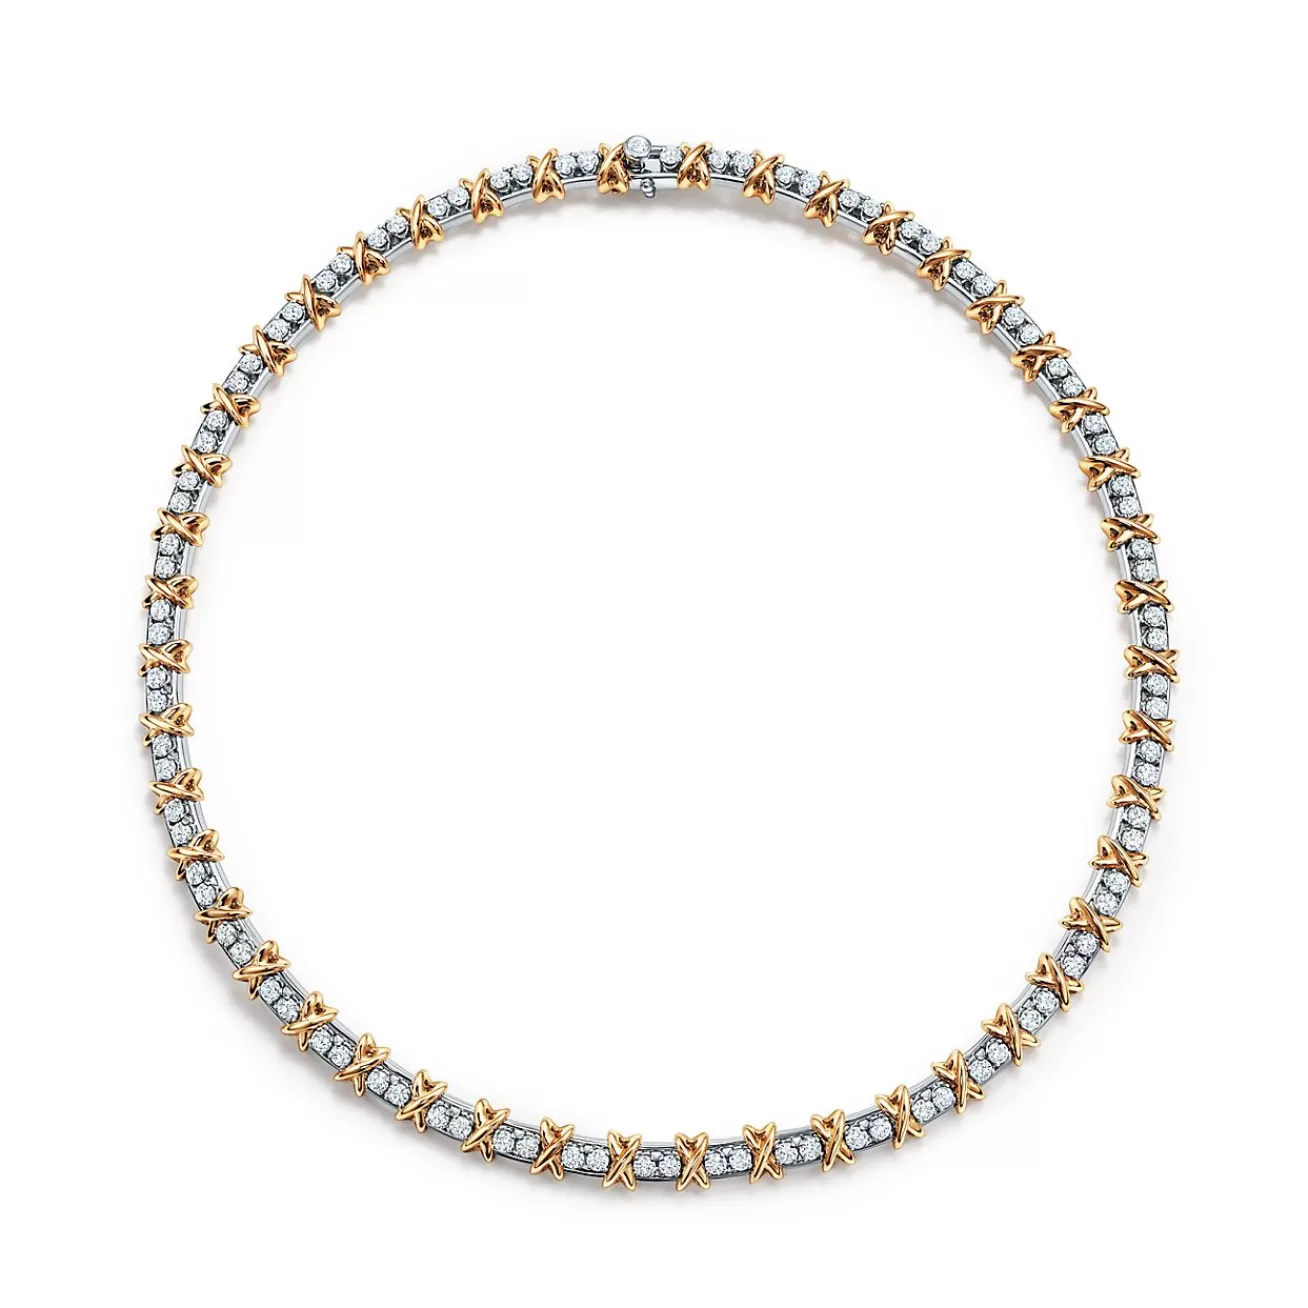 Tiffany & Co. Schlumberger by ™ Ninety-two Stone Necklace in Platinum and Gold | ^ Necklaces & Pendants | Gold Jewelry